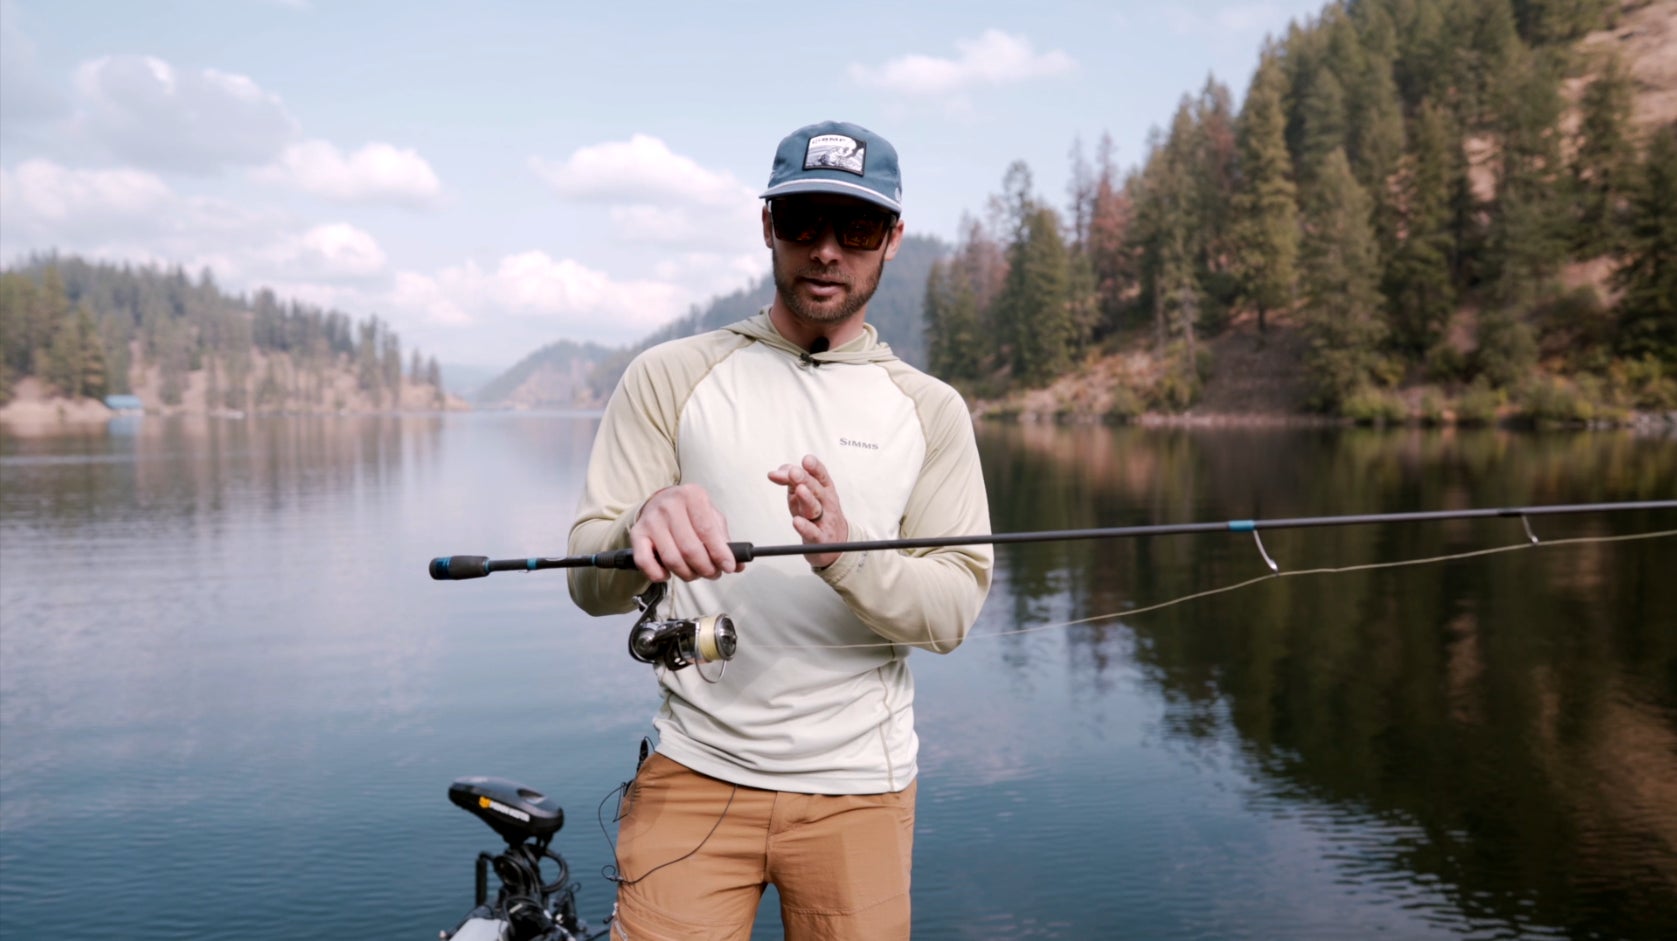 Pro Angler Brandon Palaniuk breaks down the spinning reel and shares his recommendations on how to choose yours.